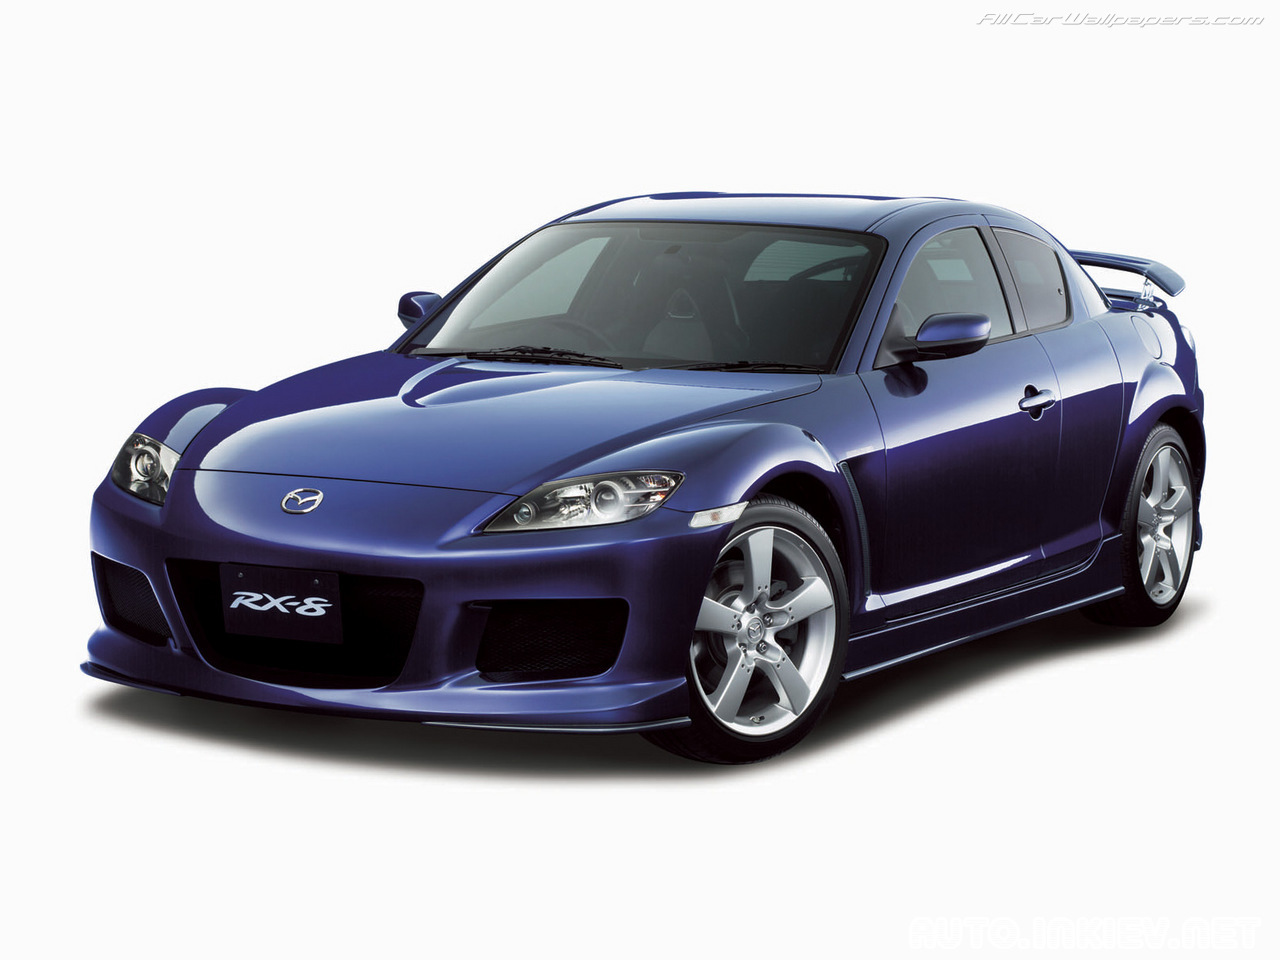 Mazda rx8 related images,start 0 - WeiLi Automotive Network